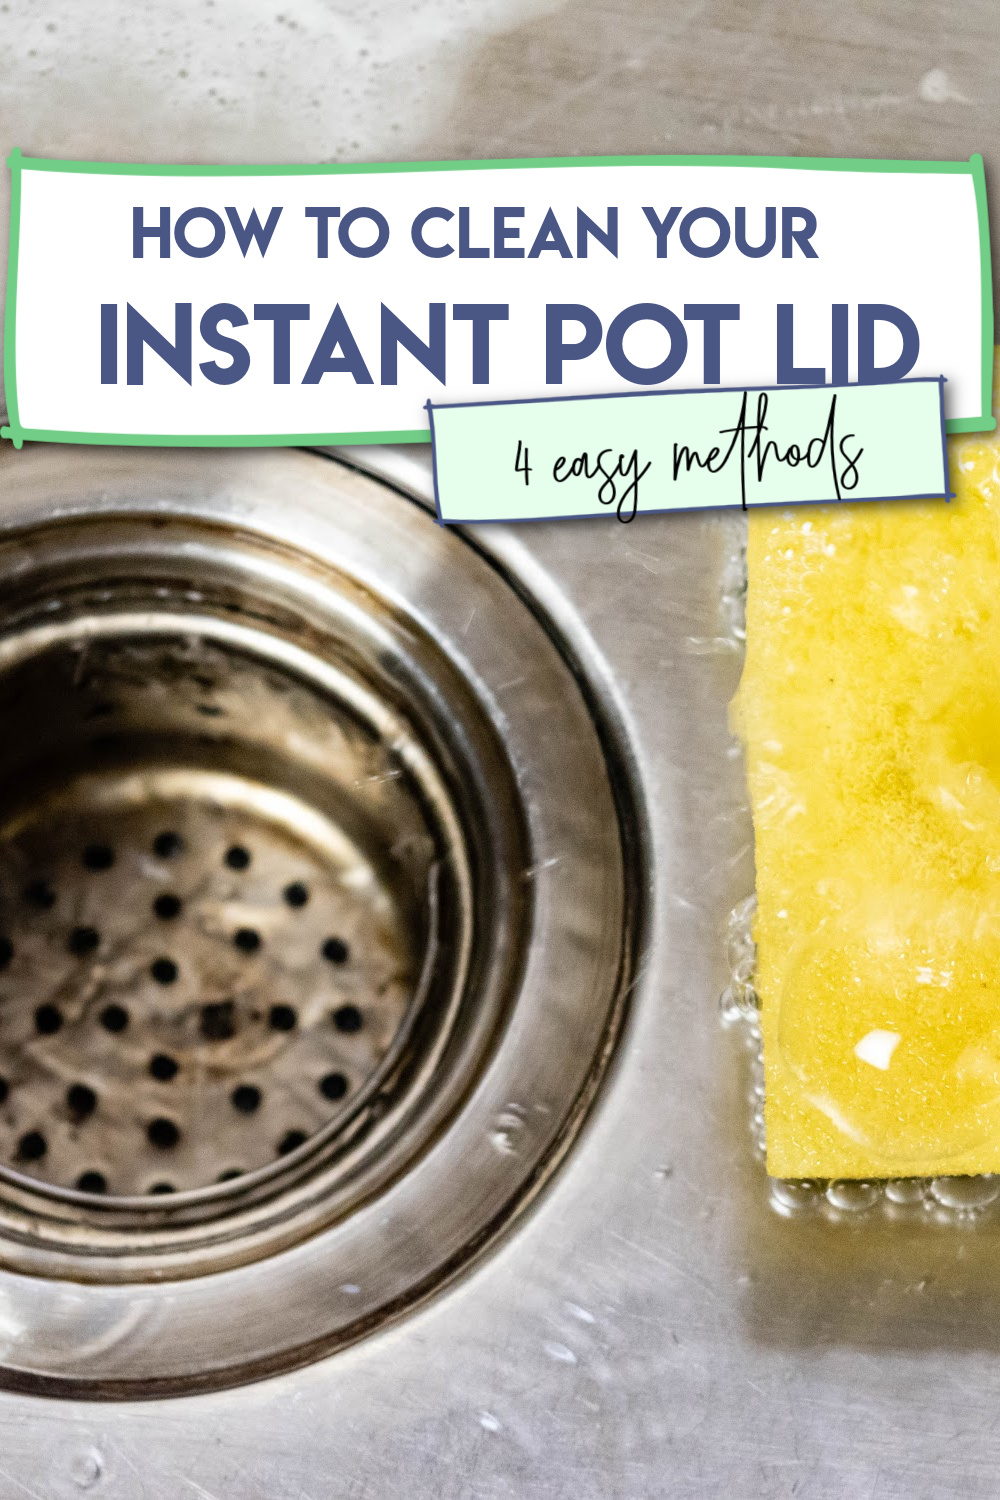 How To Clean An Instant Pot Lid